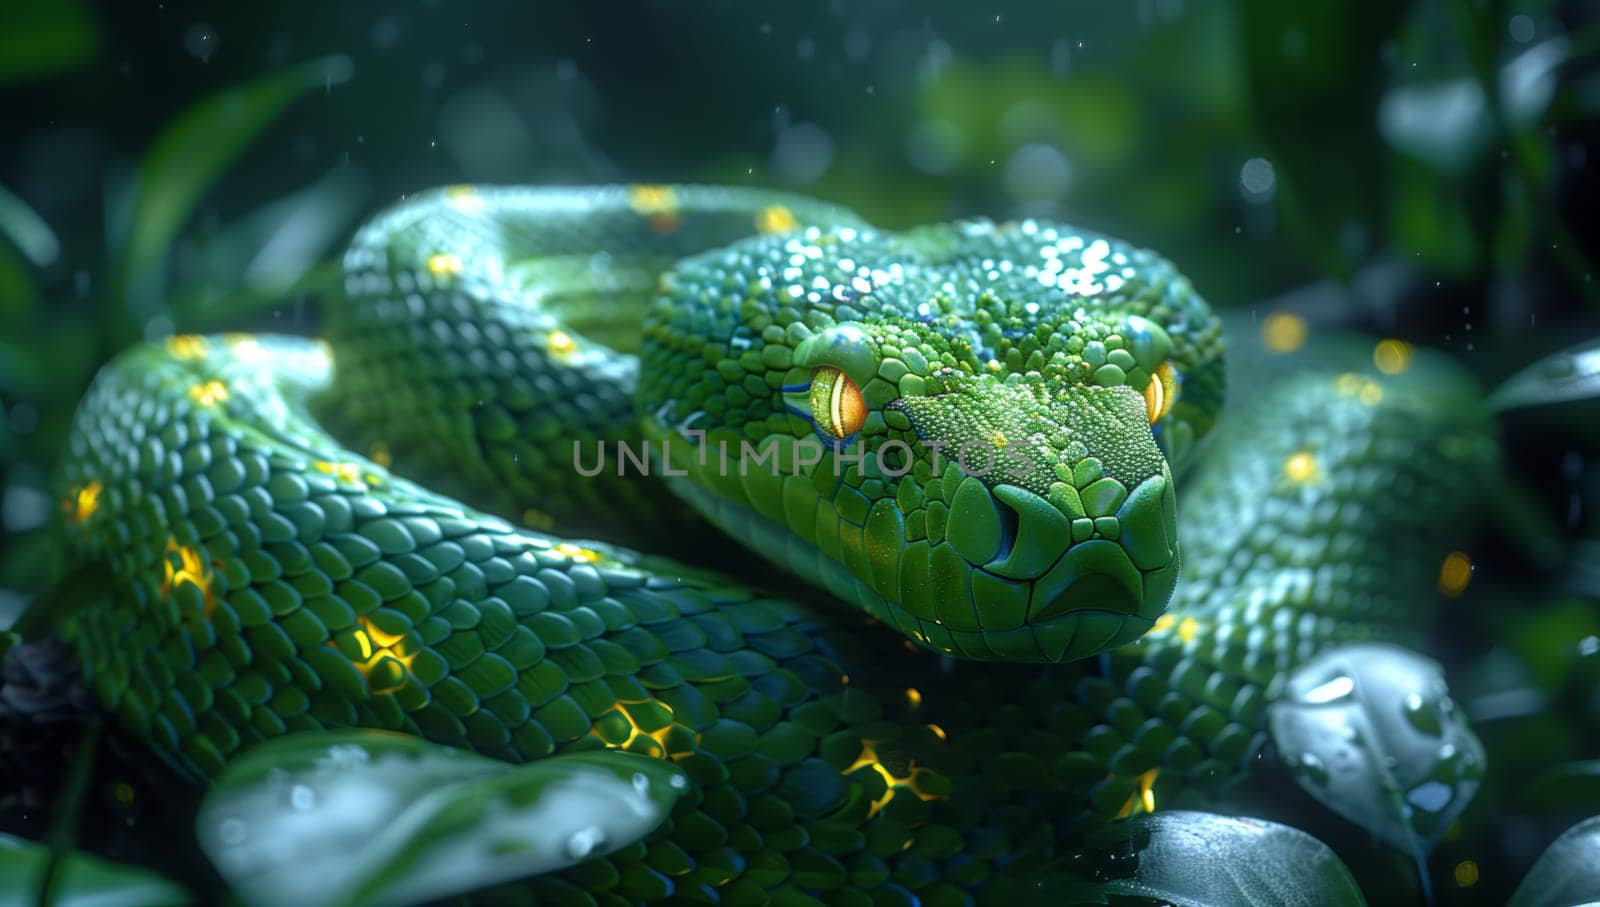 Smooth Greensnake with yellow eyes among green leaves in macro photography by richwolf